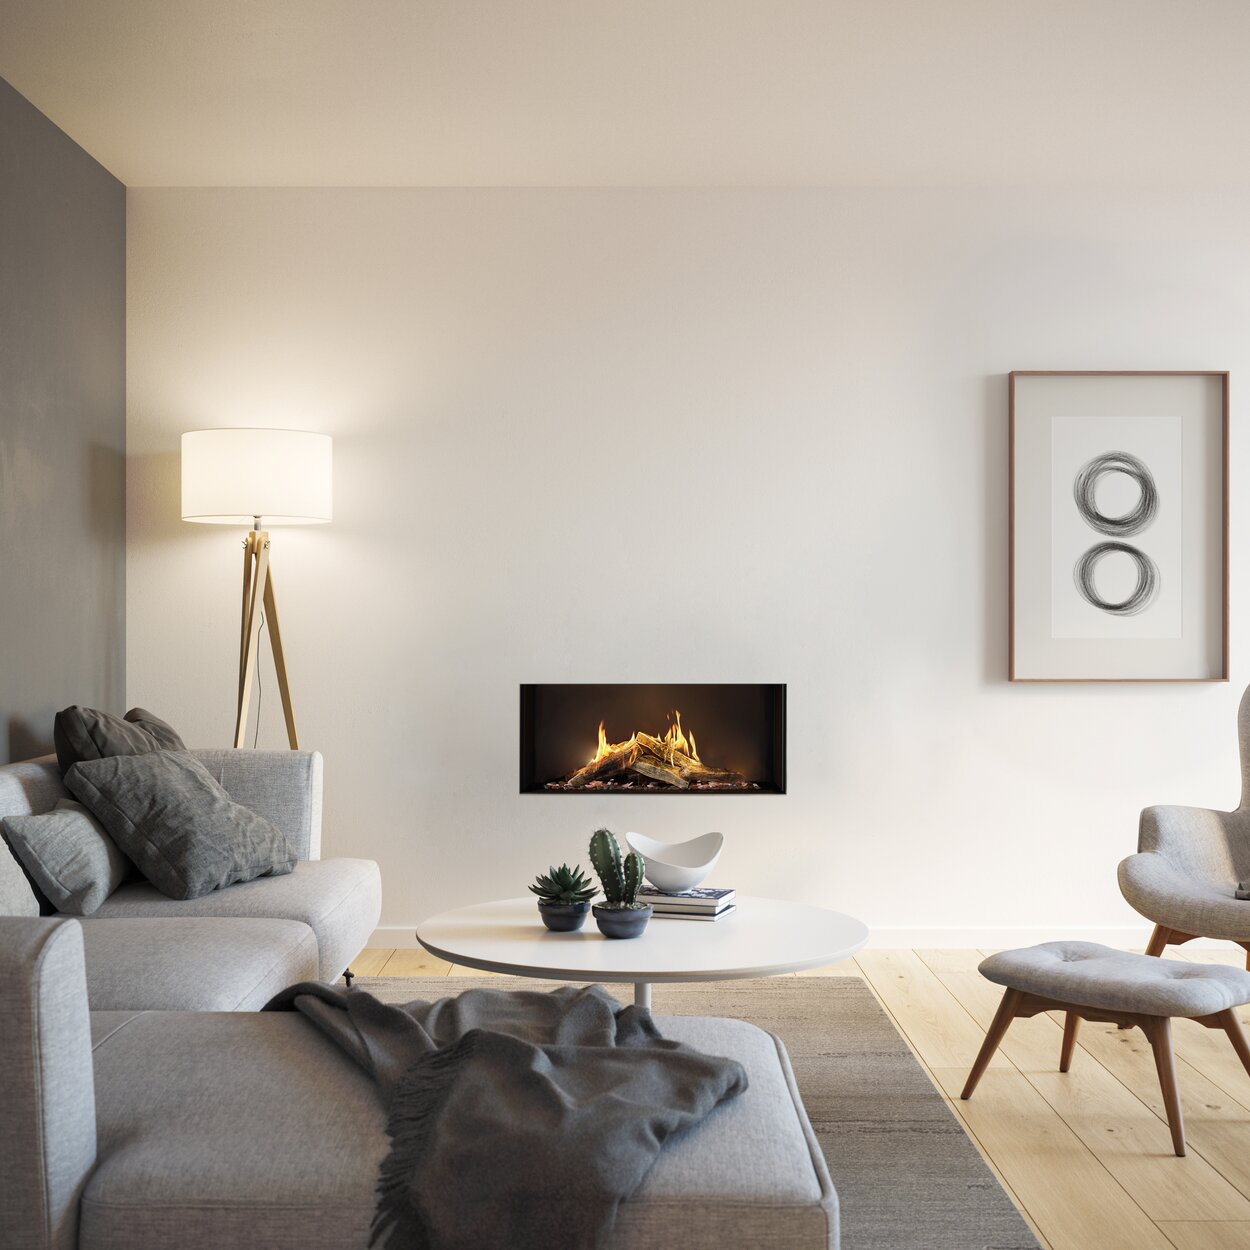 VISIO 100 gas fireplace insert with front glass in white wall and decorative living area